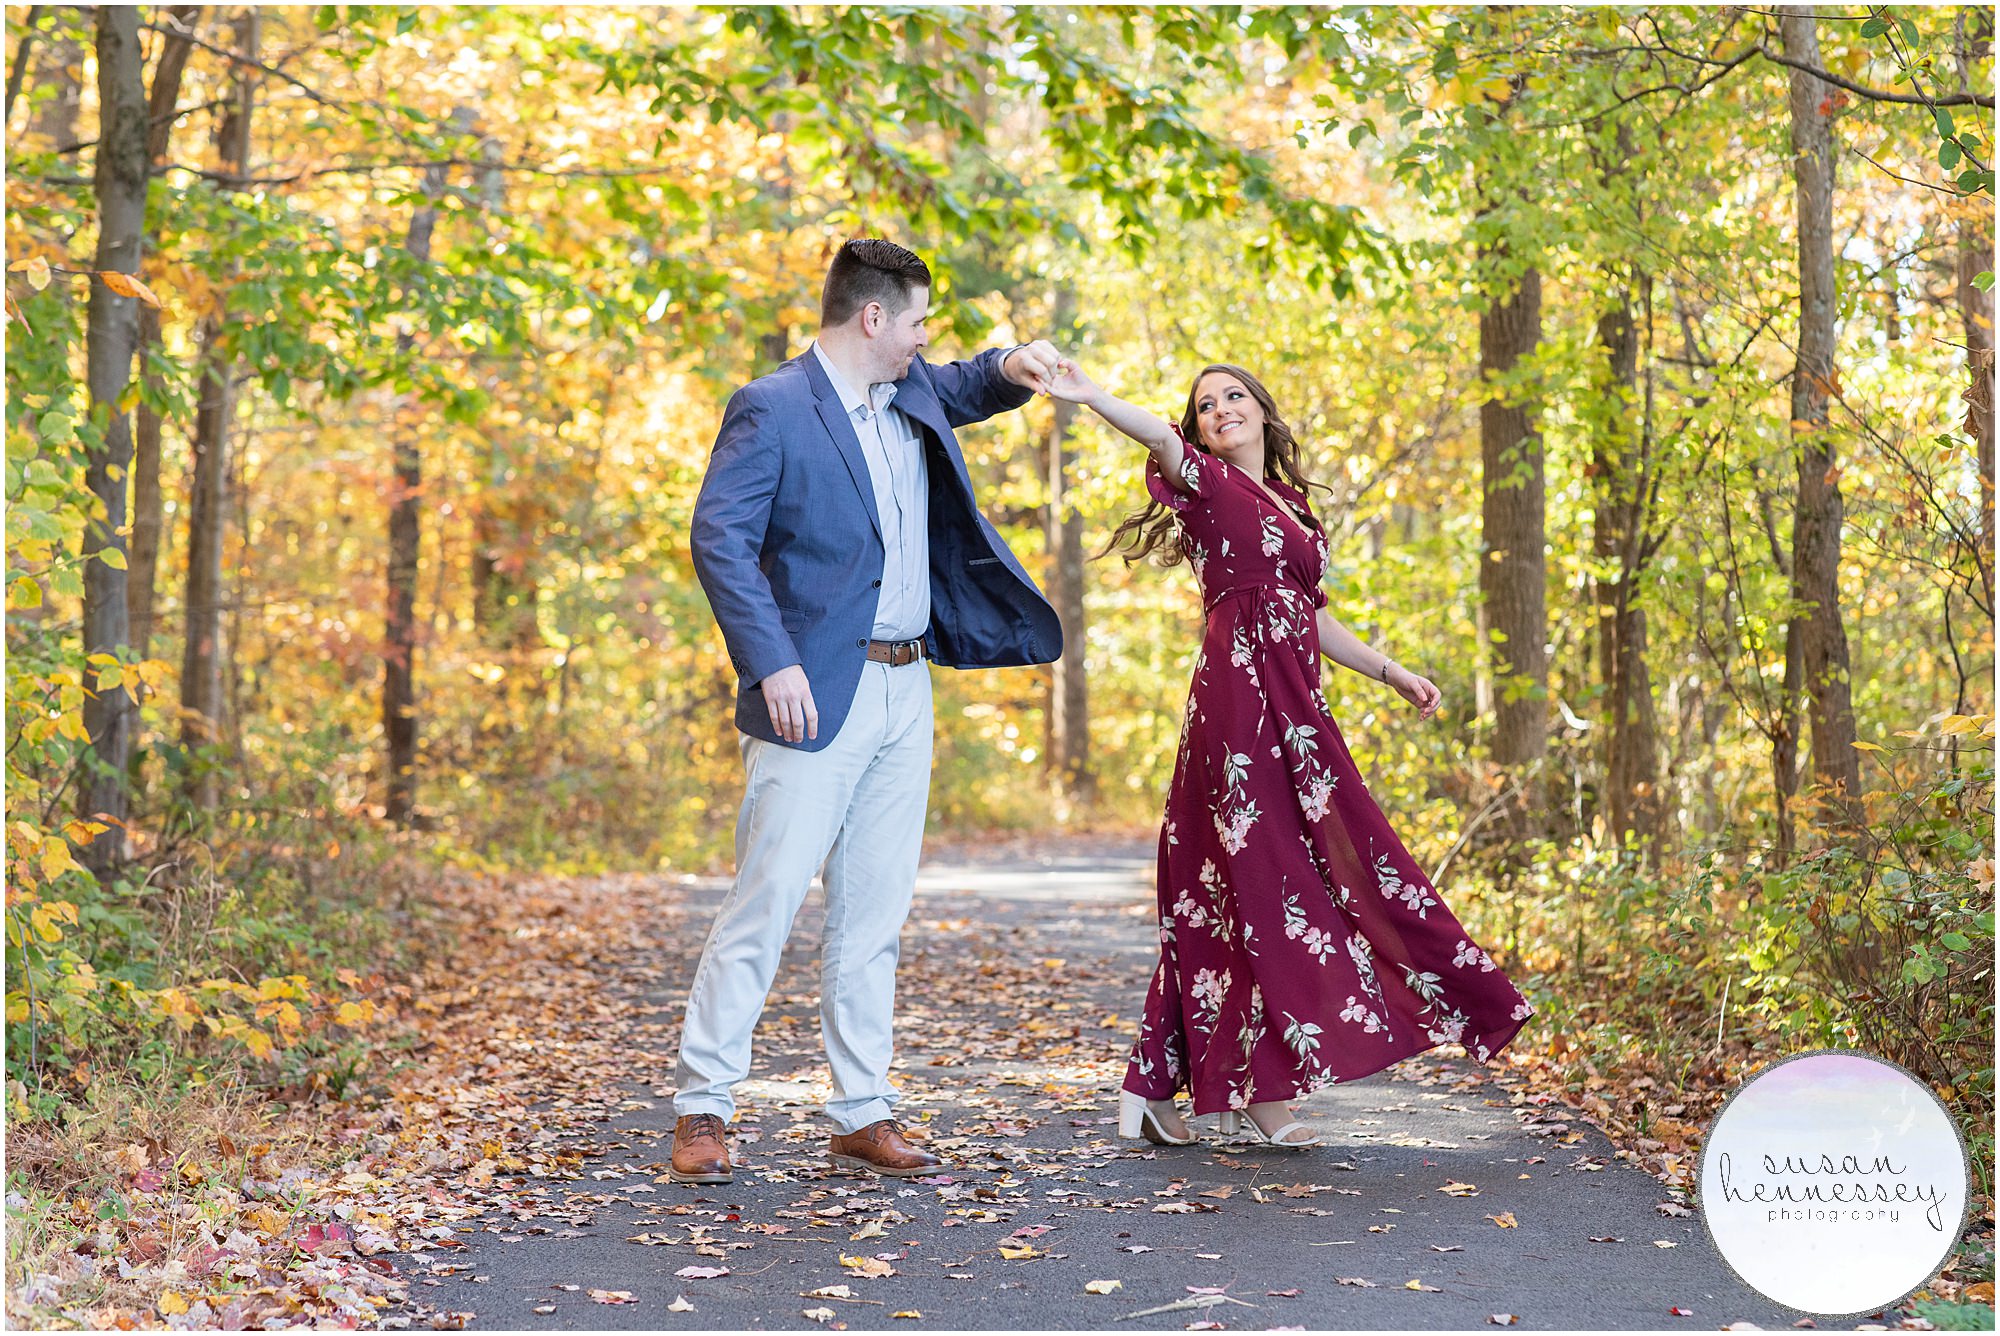 Candice and Jon's Peace Valley Park Engagement Session